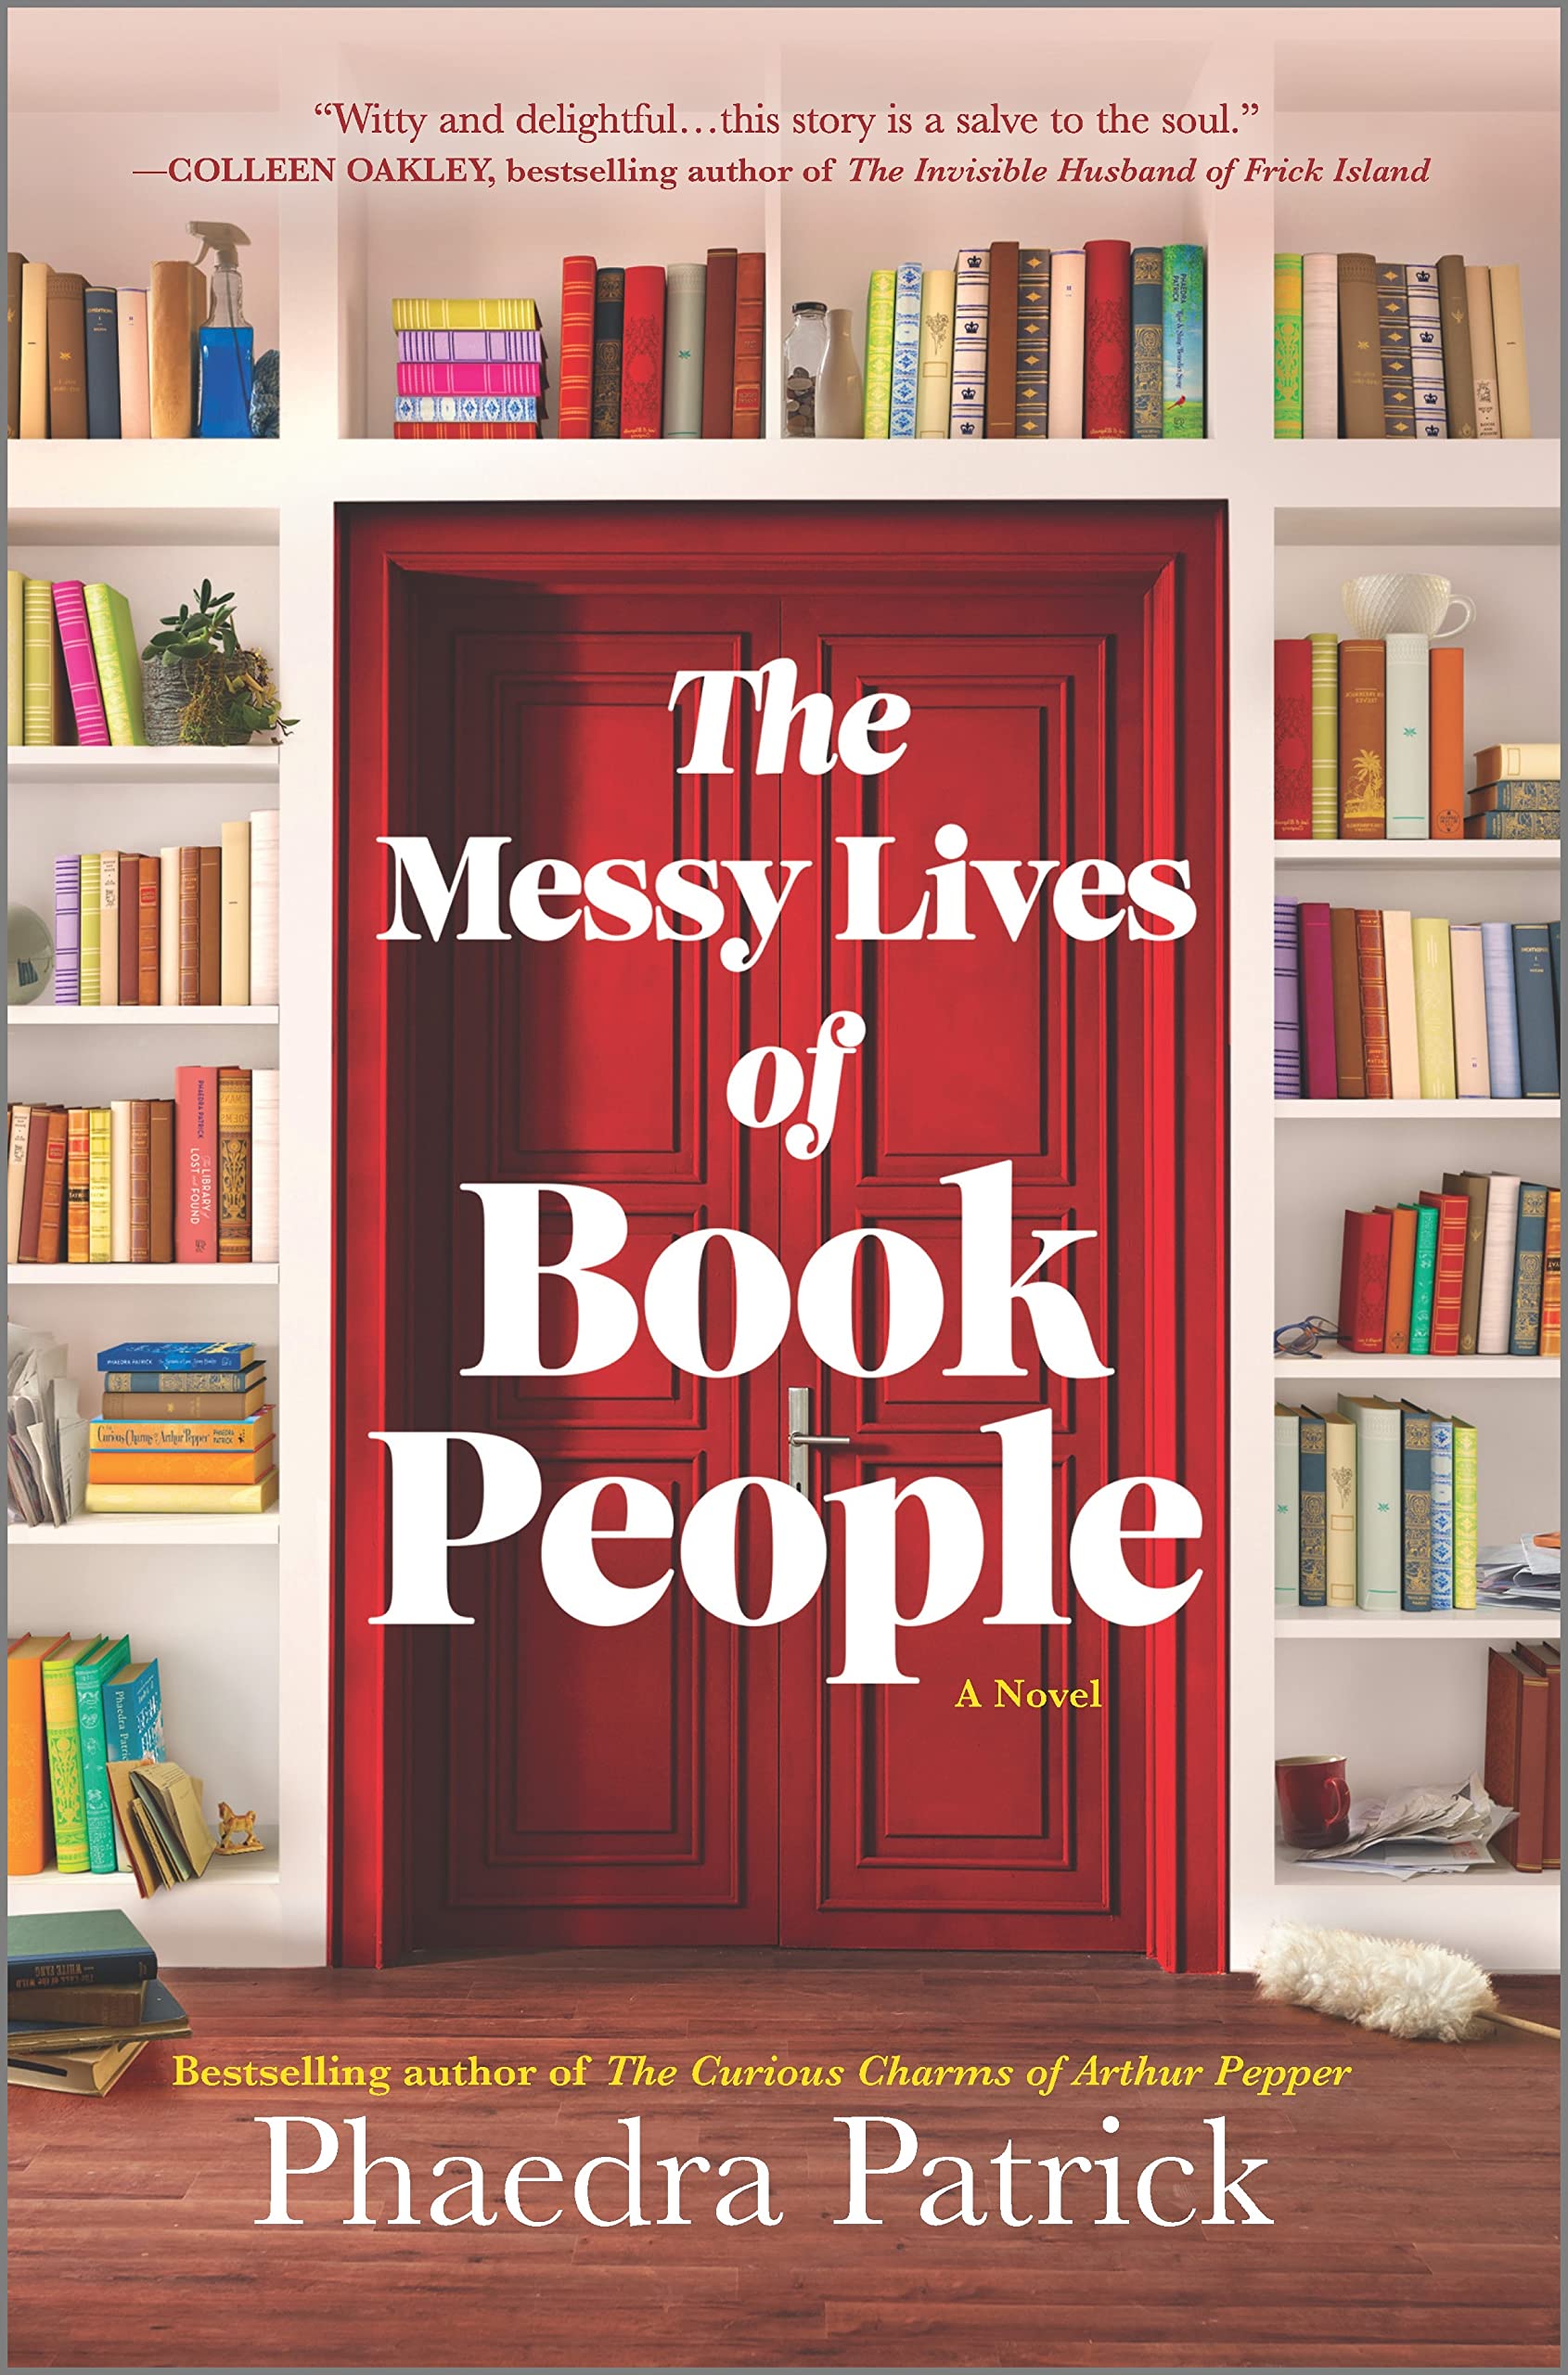 Image for "The Messy Lives of Book People"